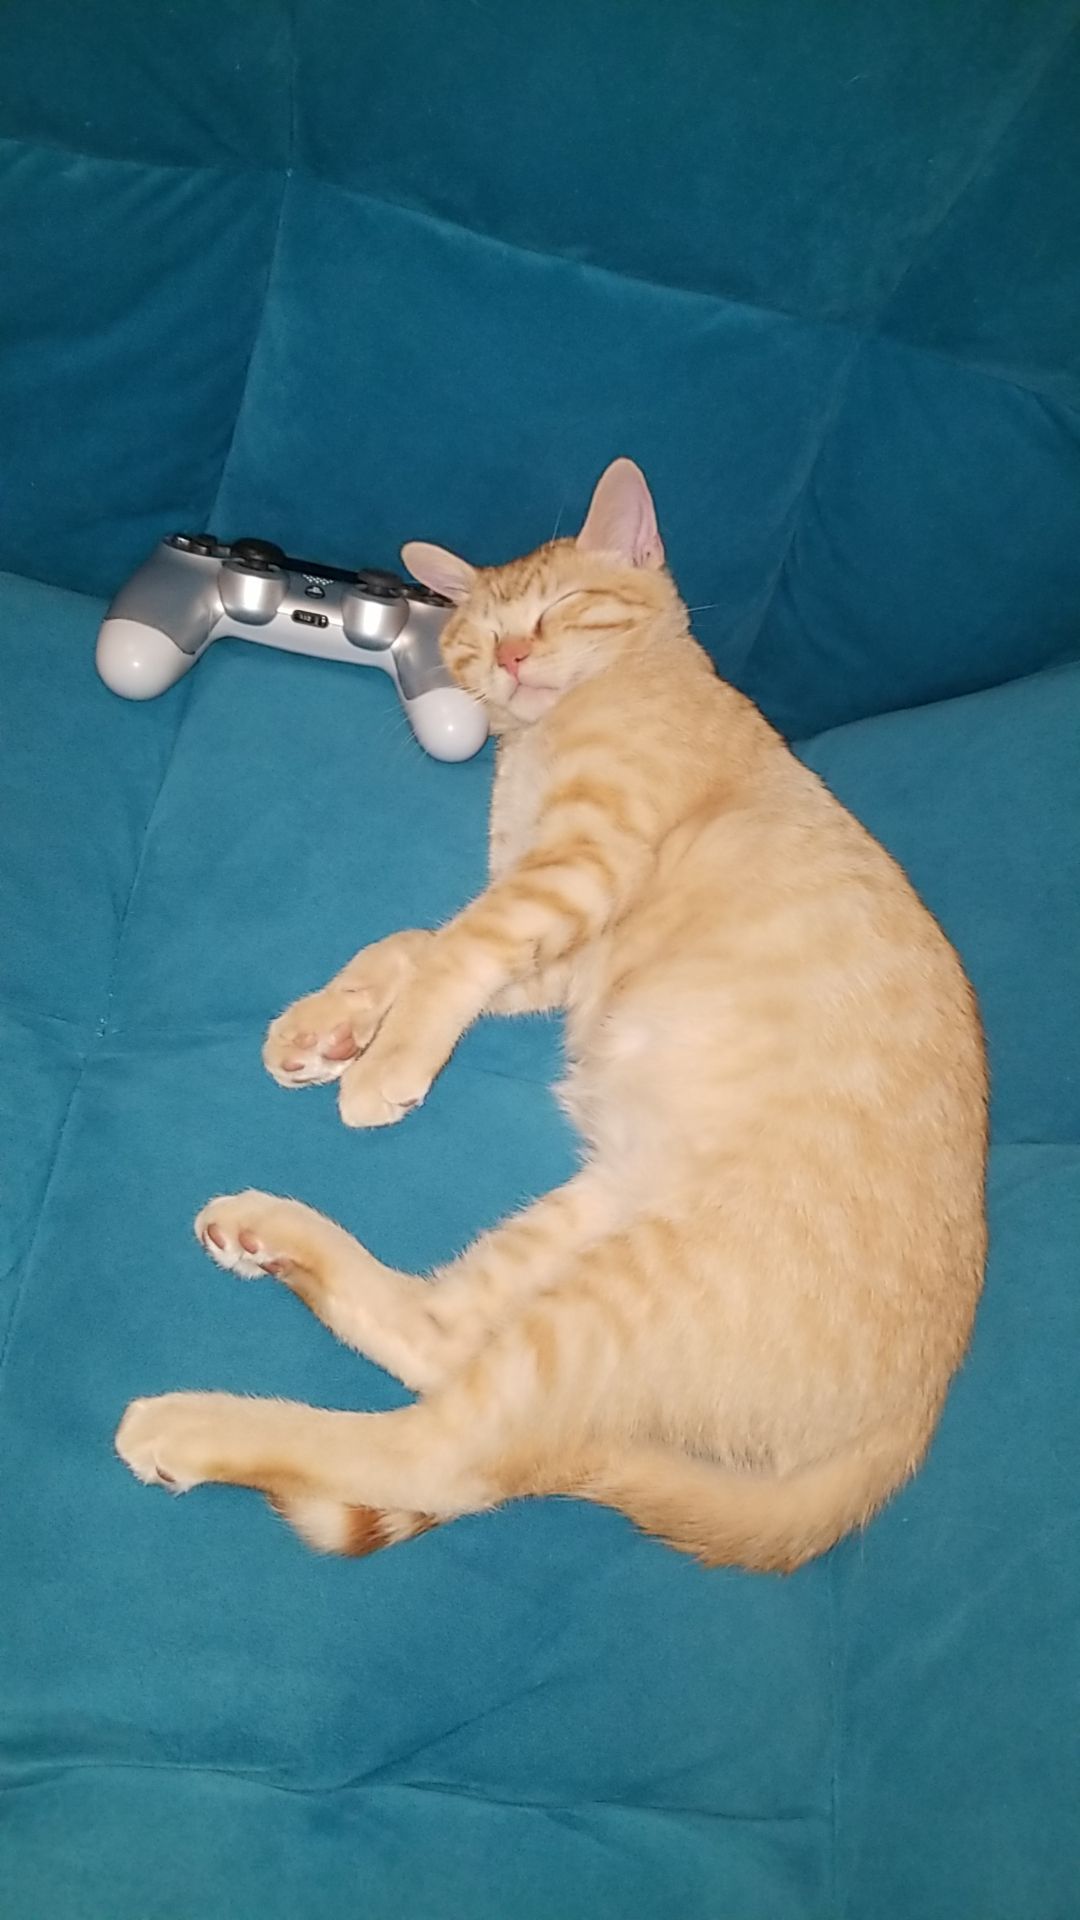 I'm trying to play some games. Should I wake him up? lol